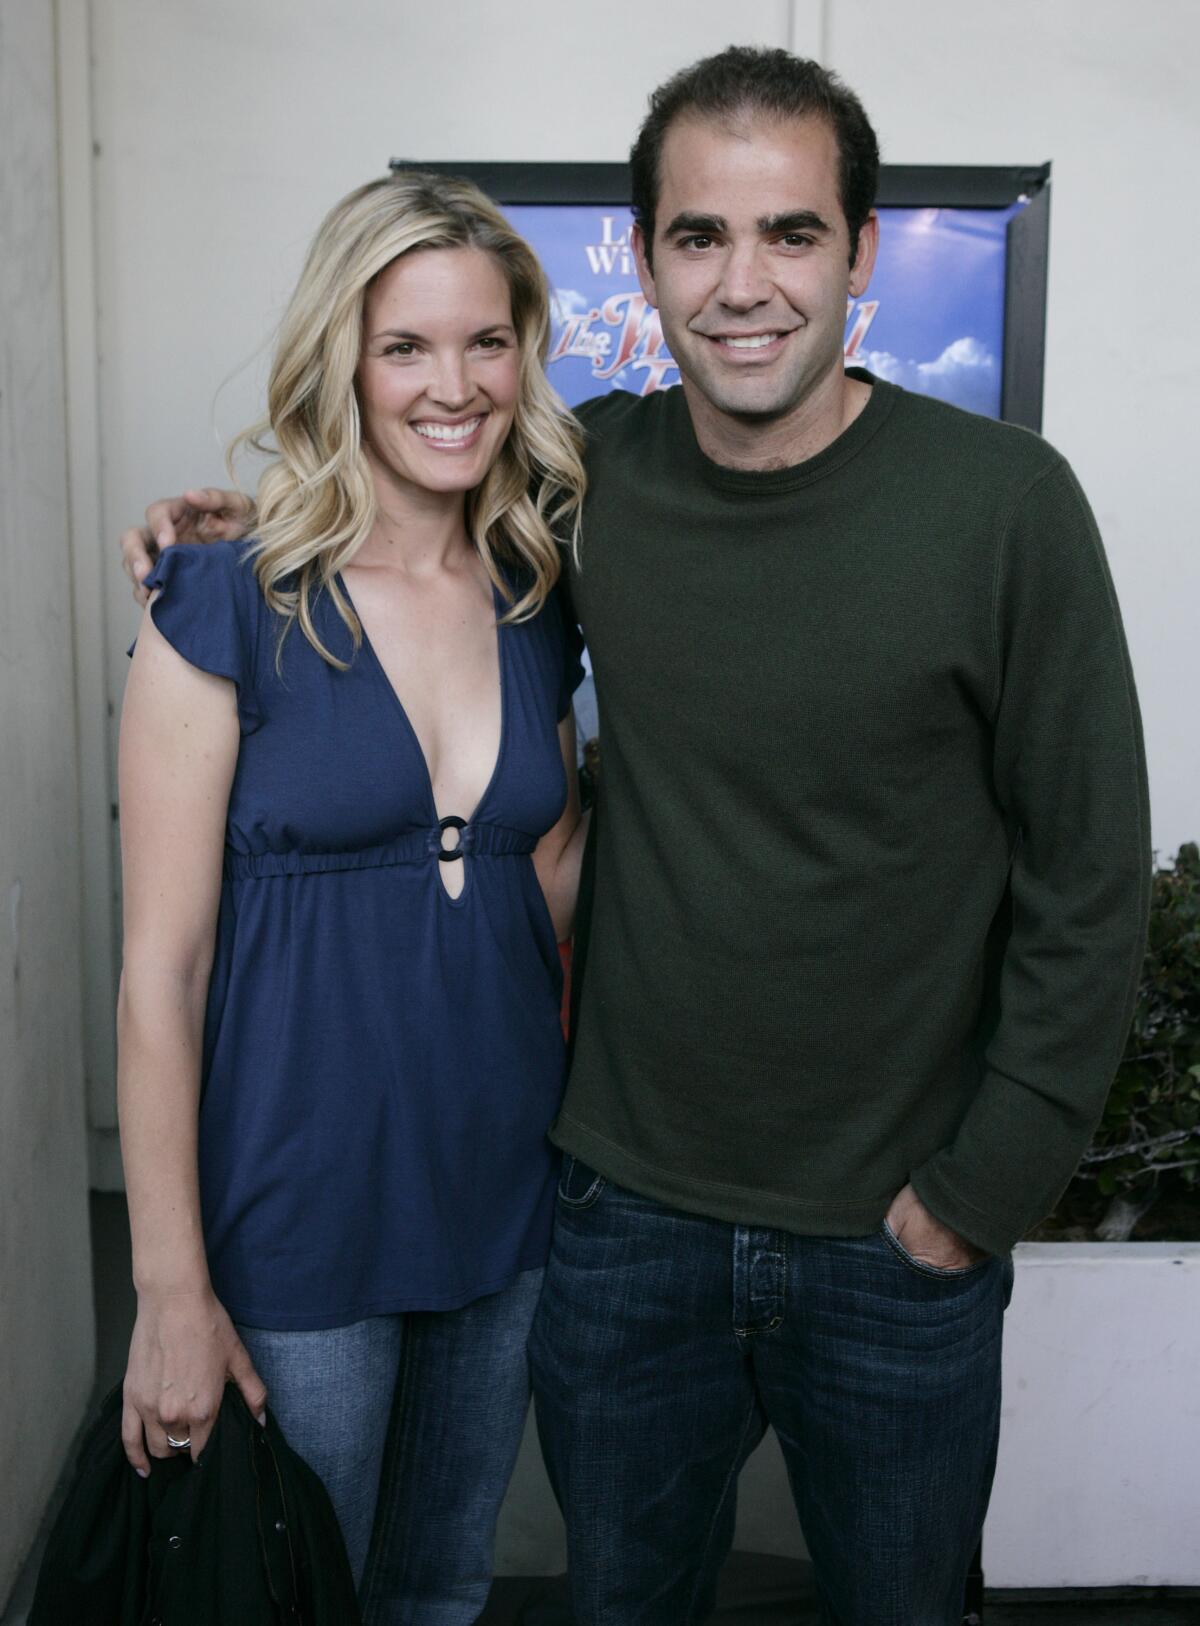 Bridgette Wilson-Sampras smiles in a blue blouse and jeans as she is hugged by Pete Sampras in a green long-sleeve shirt.